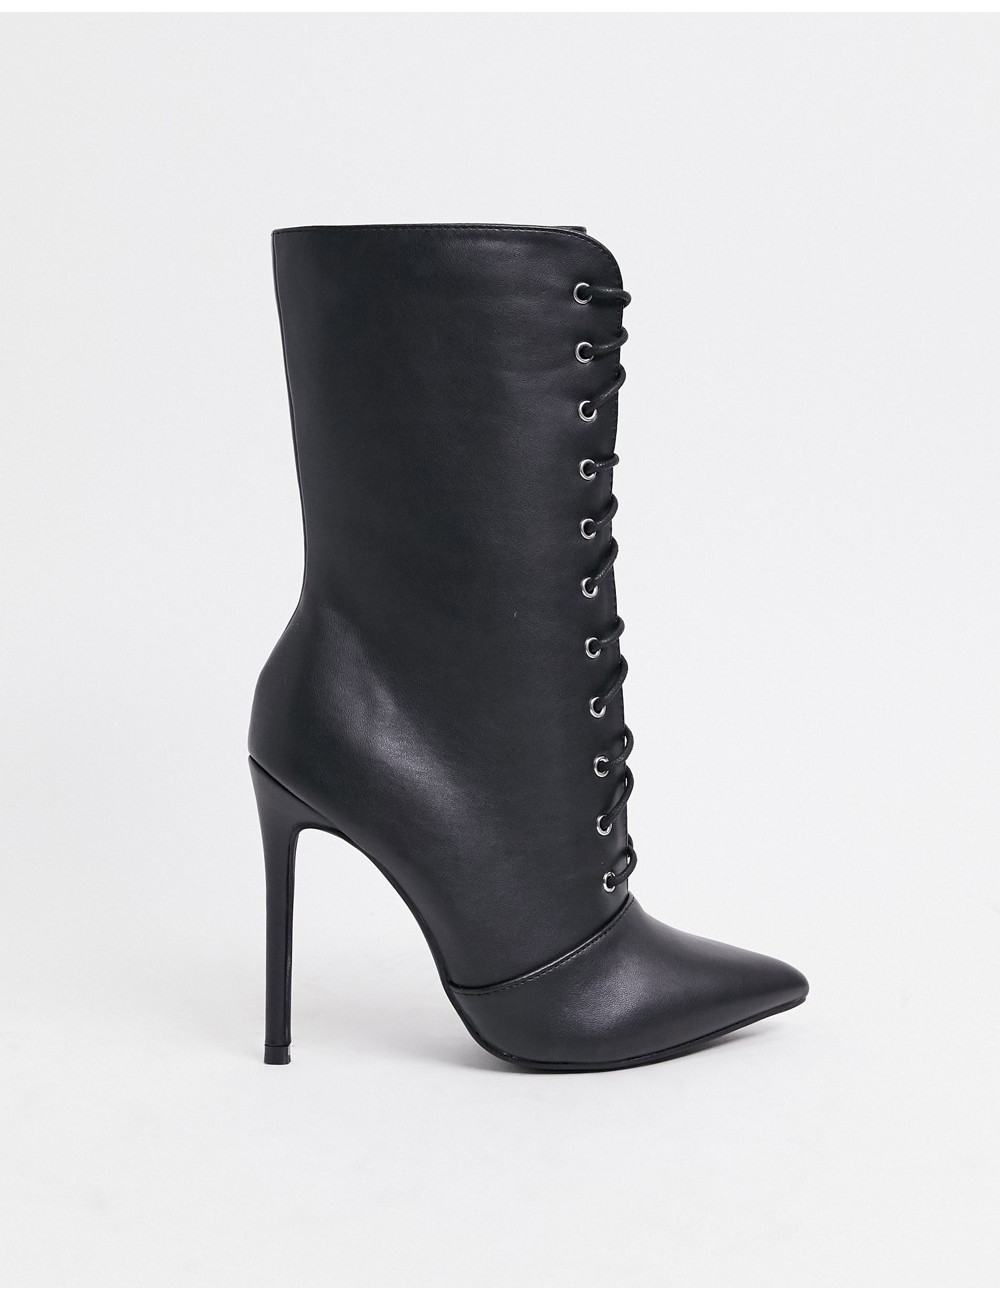 Glamorous lace up boots in...